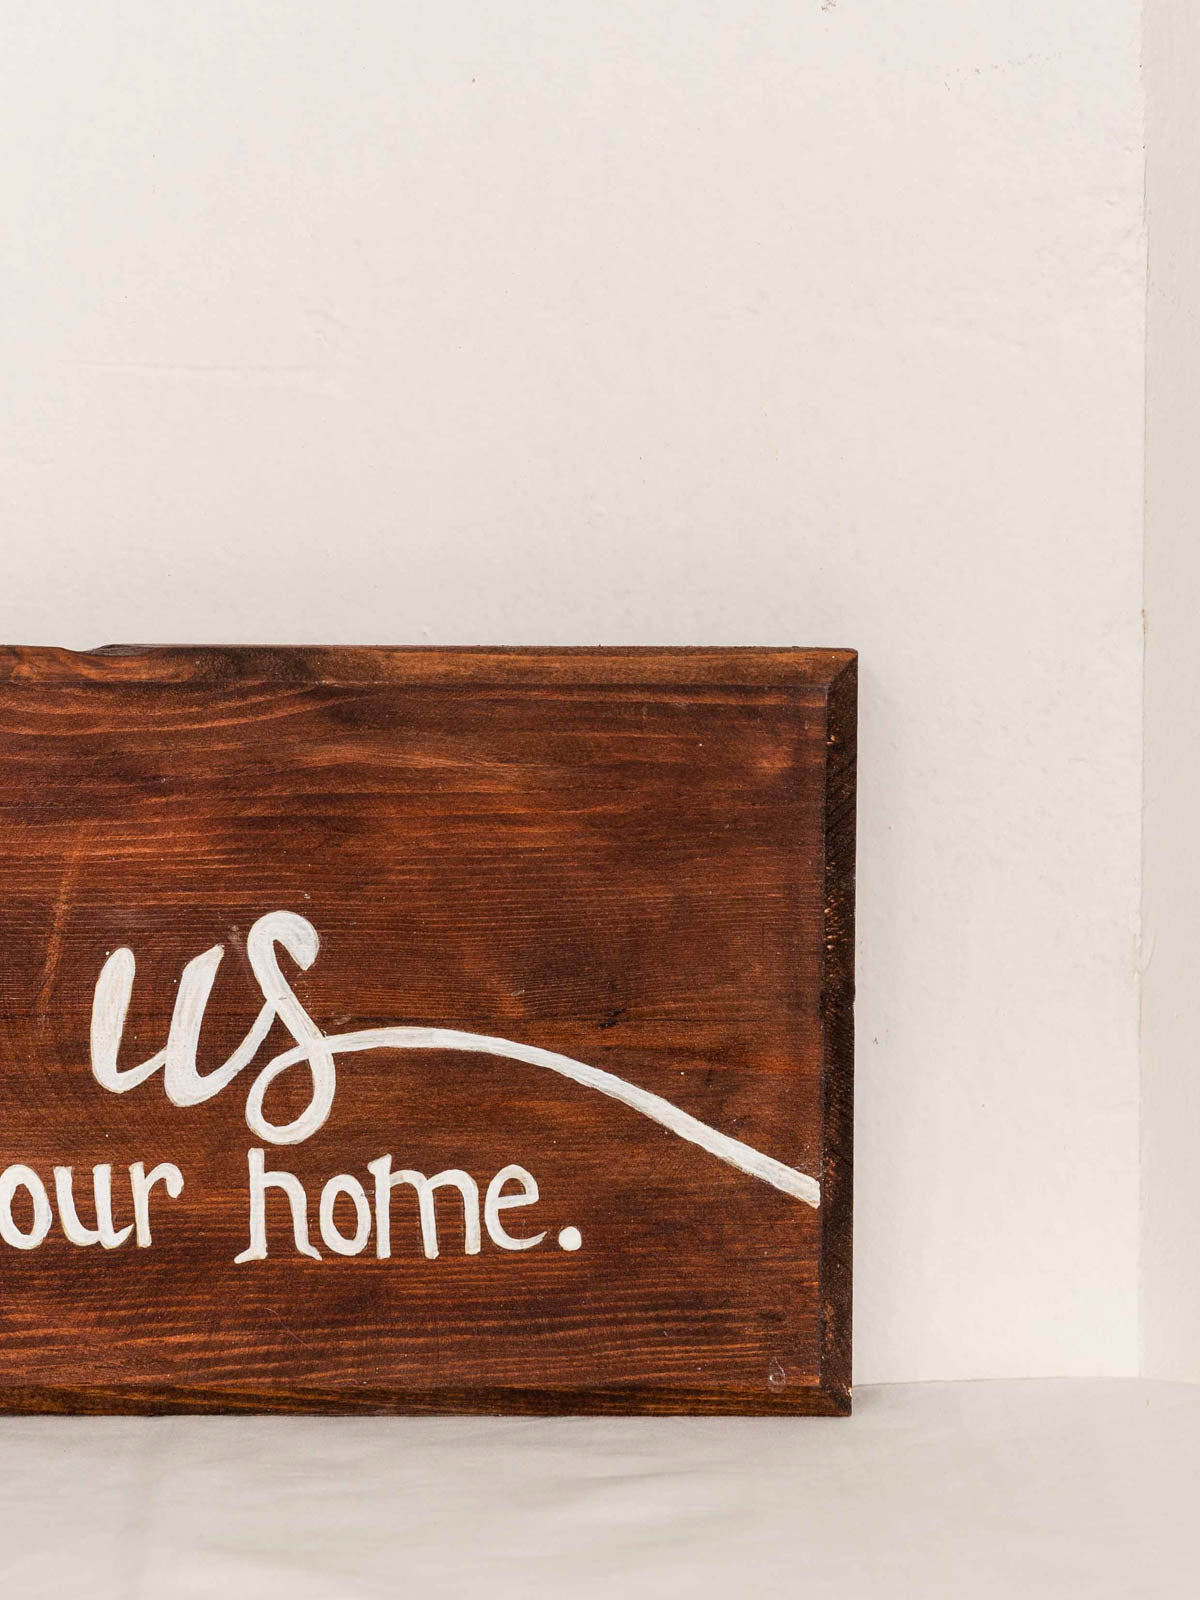 This Is Us - Wood Distressed